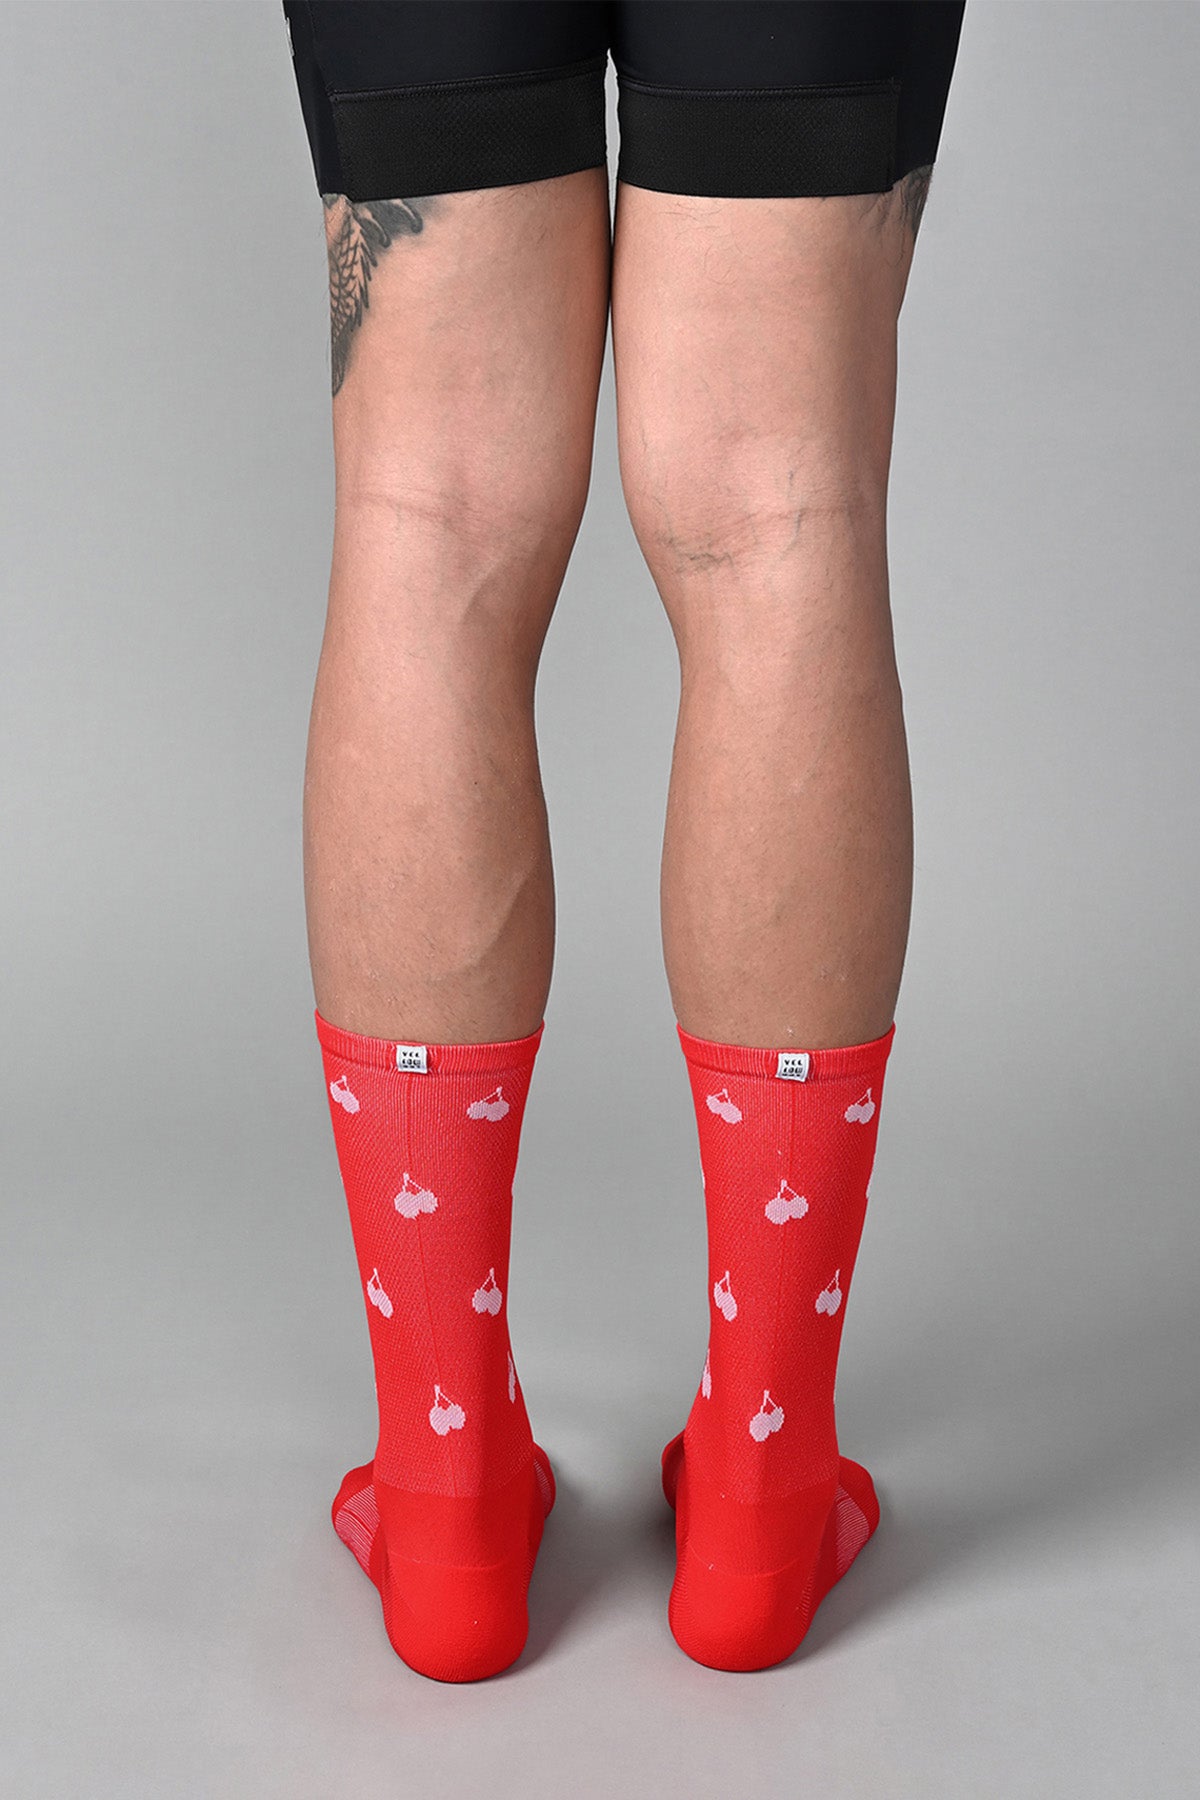 CHERRY - CANDY APPLE RED REAR | BEST CYCLING SOCKS